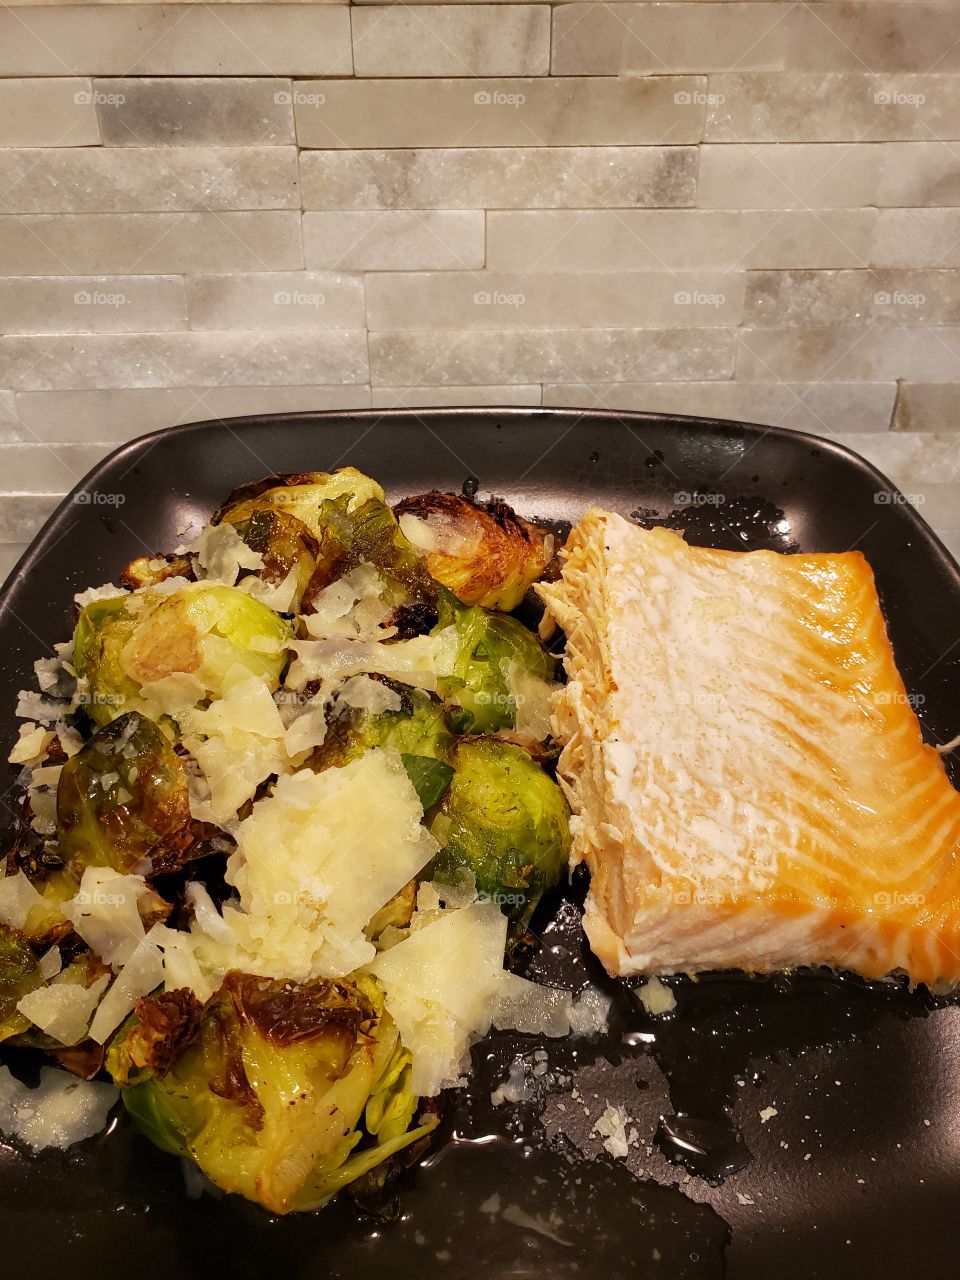 salmon and brussel sprouts